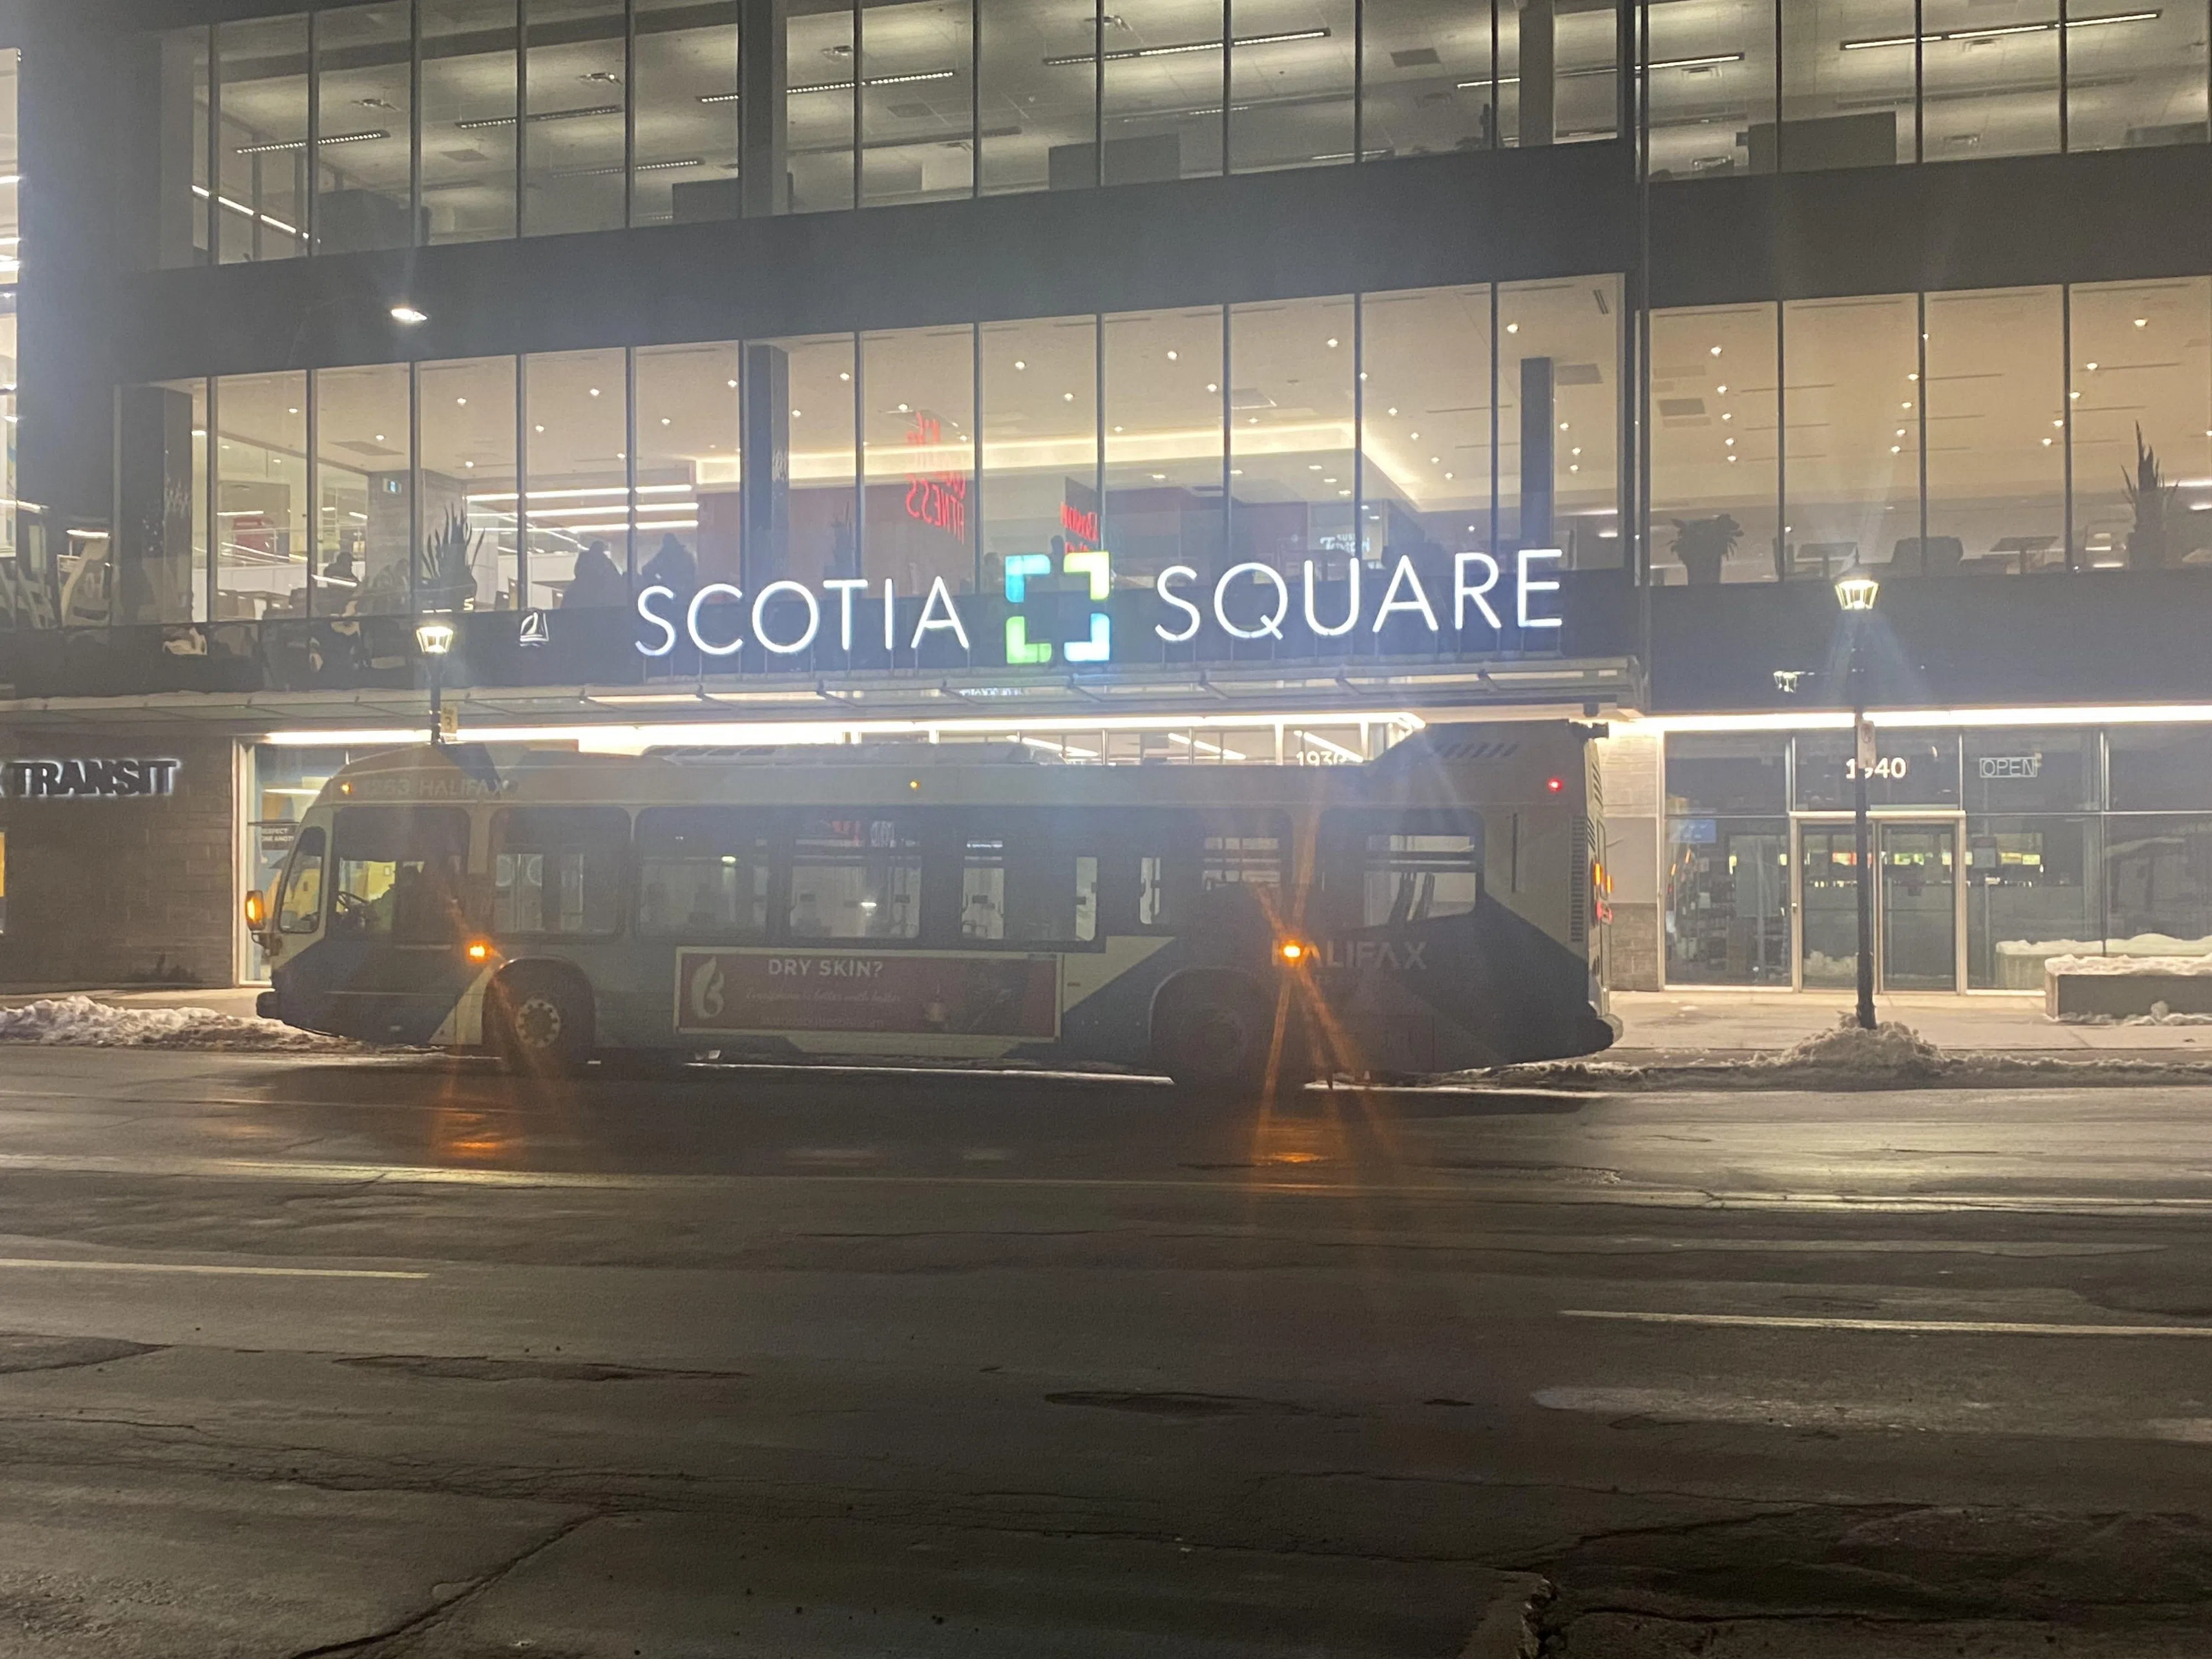 Big changes coming to Scotia Square bus terminal